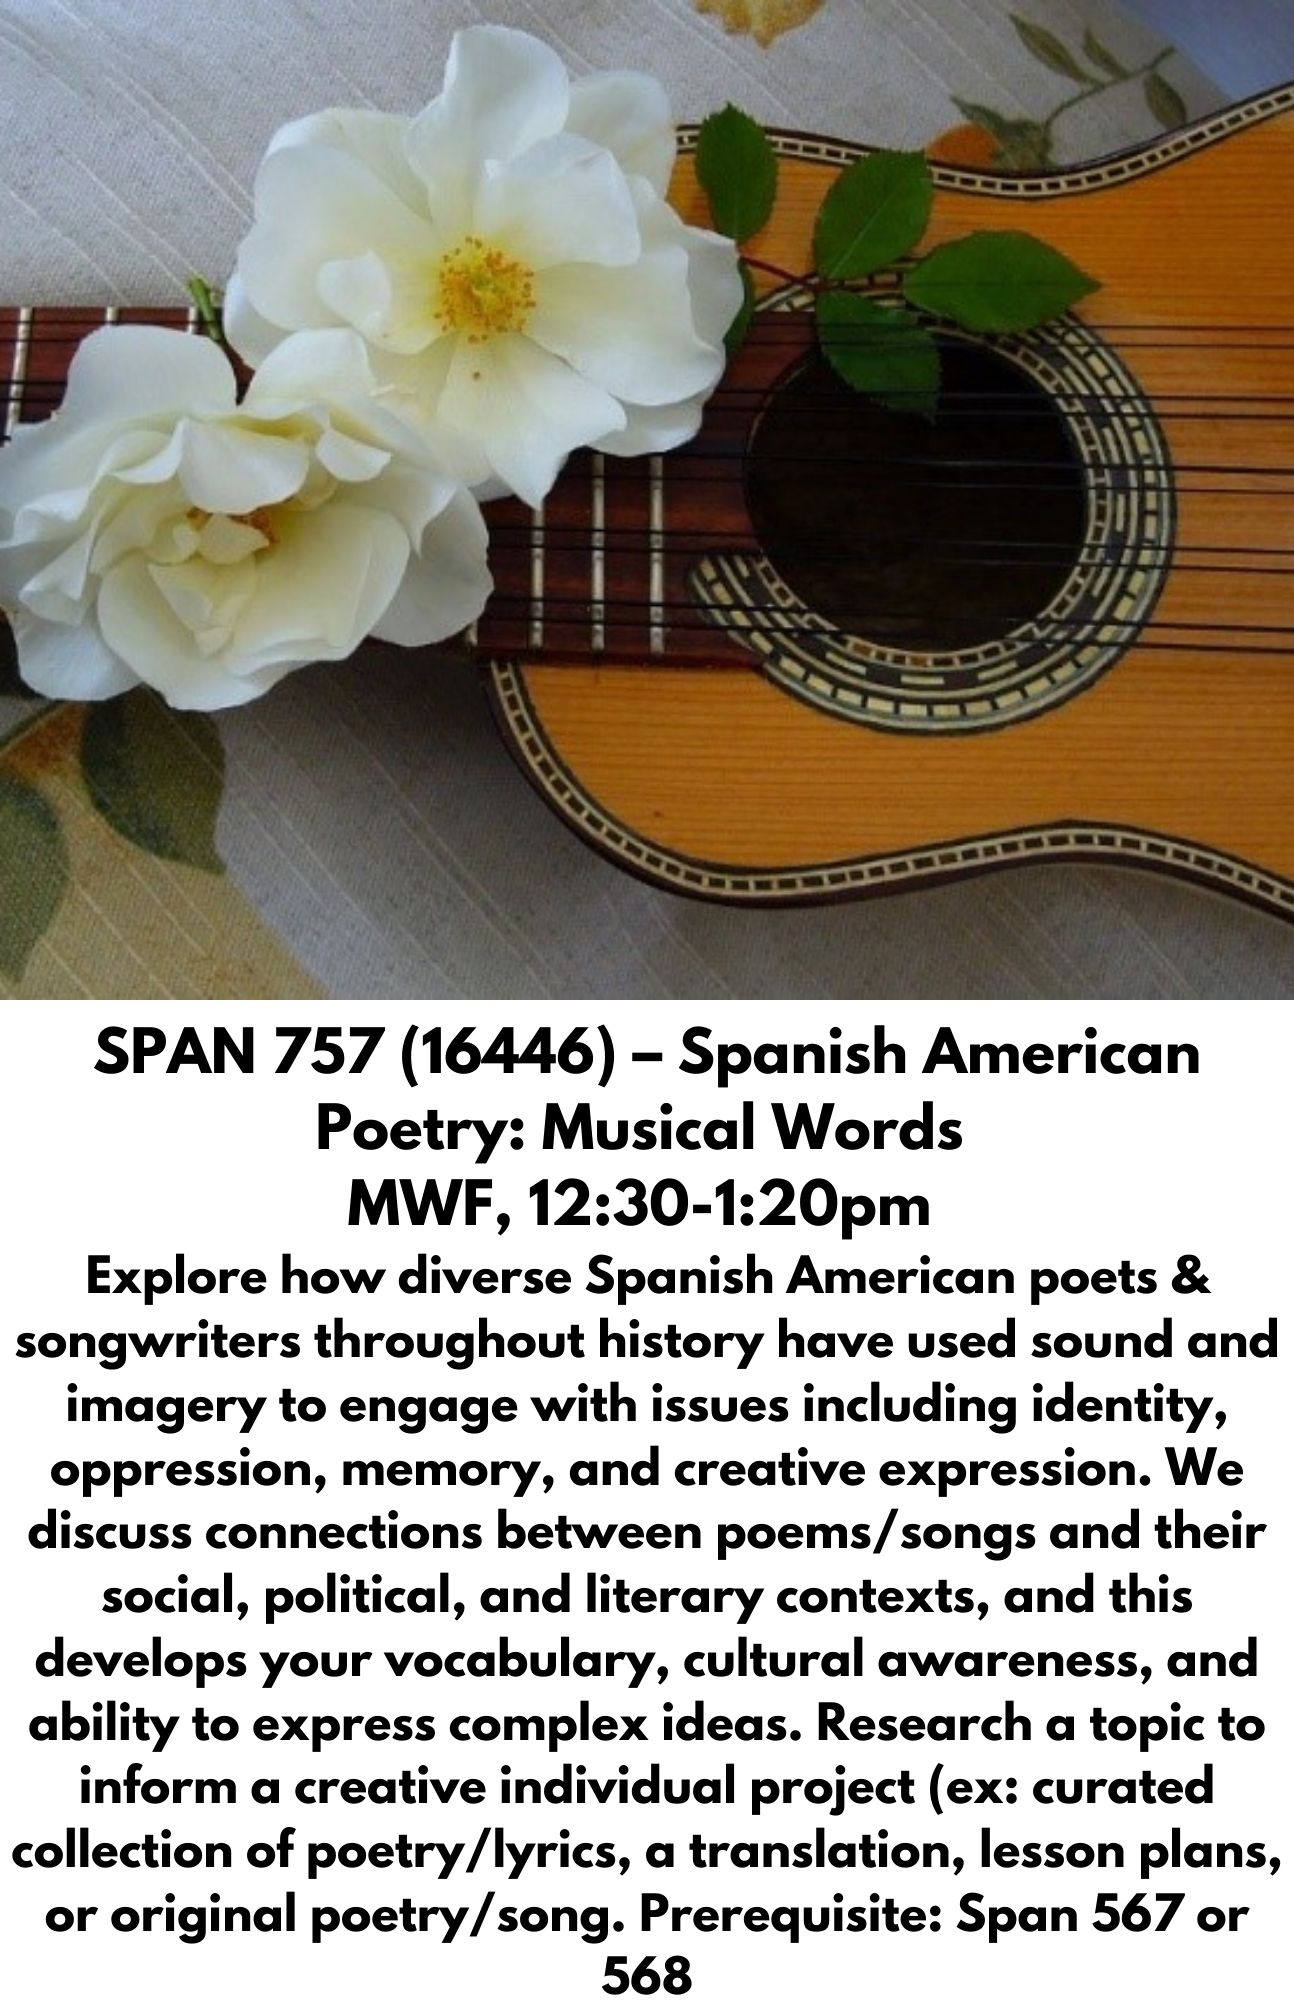 SPAN 757 (16446) – Spanish American Poetry: Musical Words  MWF, 12:30-1:20pm  Explore how diverse Spanish American poets & songwriters throughout history have used sound and imagery to engage with issues including identity, oppression, memory, and creative expression. We discuss connections between poems/songs and their social, political, and literary contexts, and this develops your vocabulary, cultural awareness, and ability to express complex ideas. Research a topic to inform a creative individual project (ex: curated collection of poetry/lyrics, a translation, lesson plans, or original poetry/song. Prerequisite: Span 567 or 568